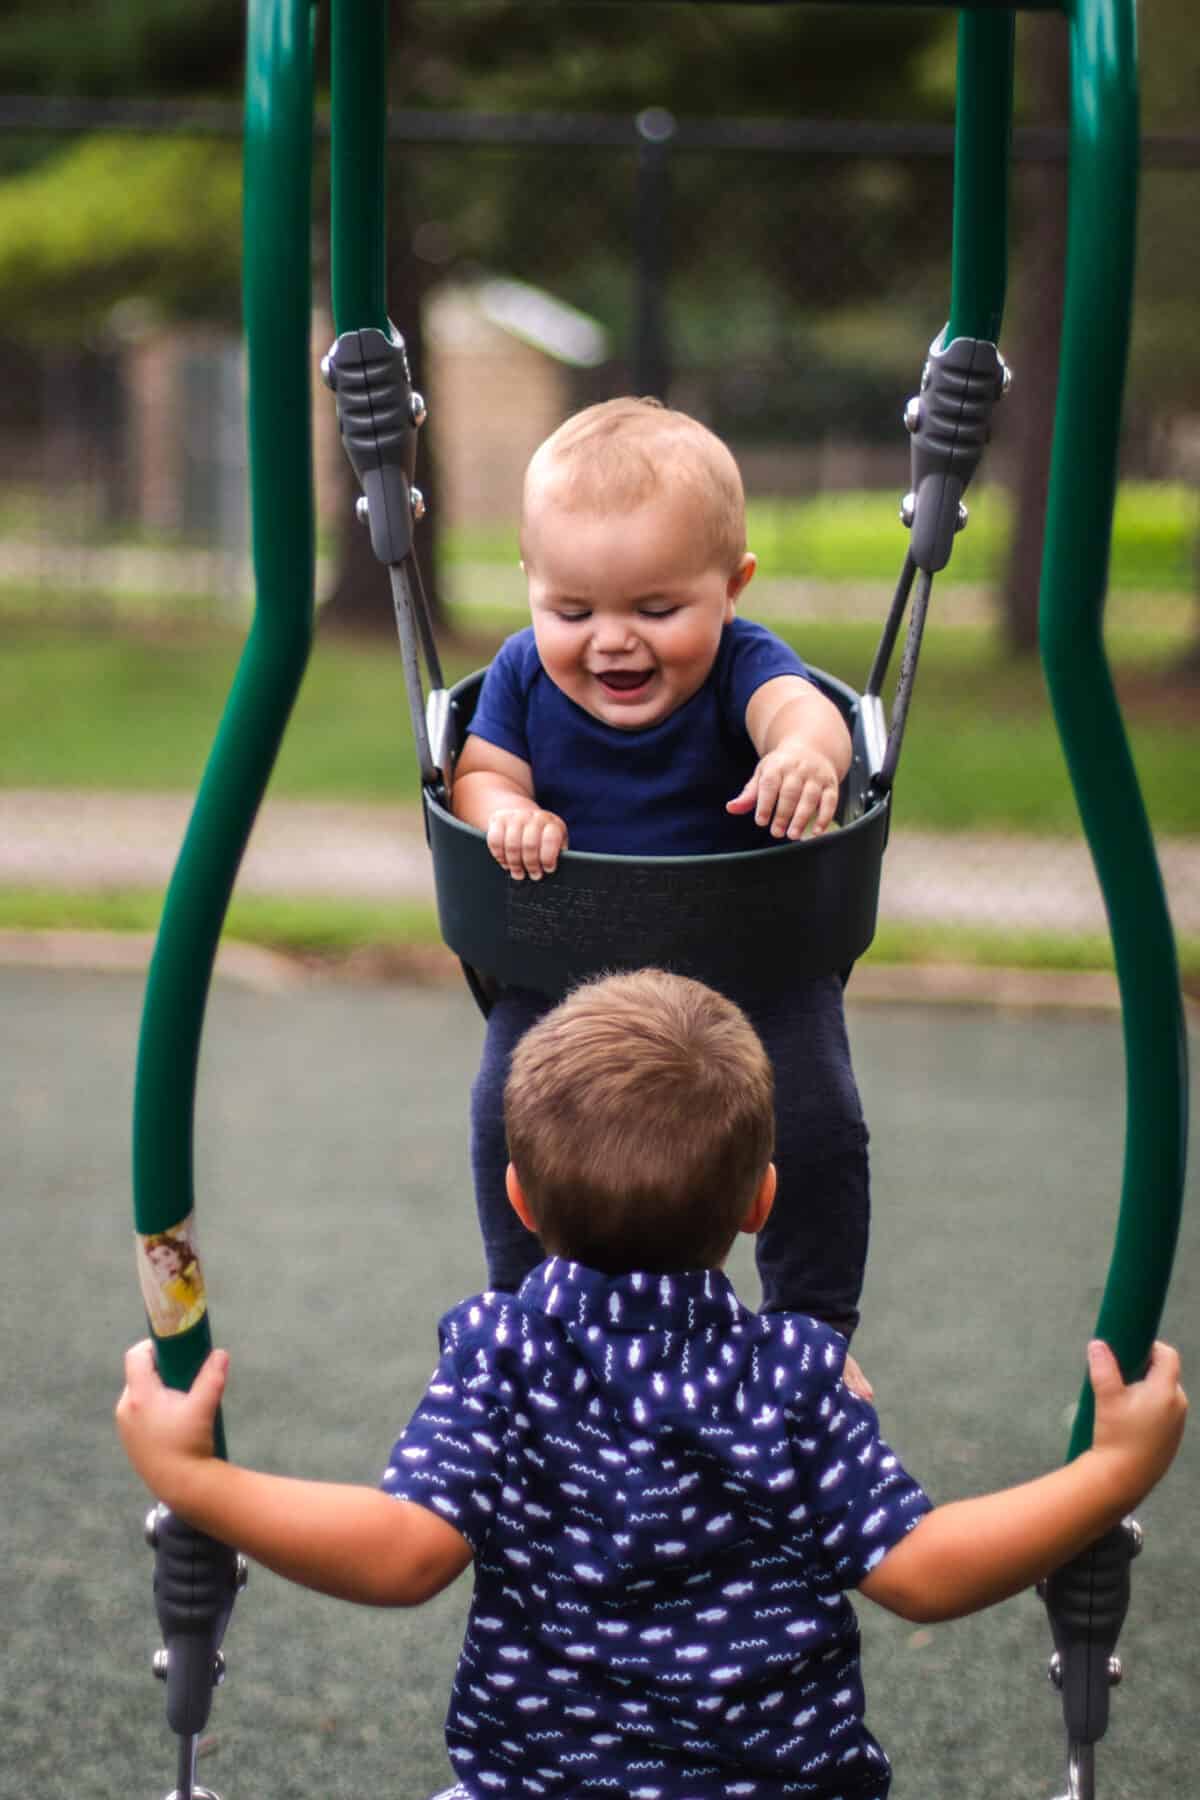 Two children on expression swing smiling